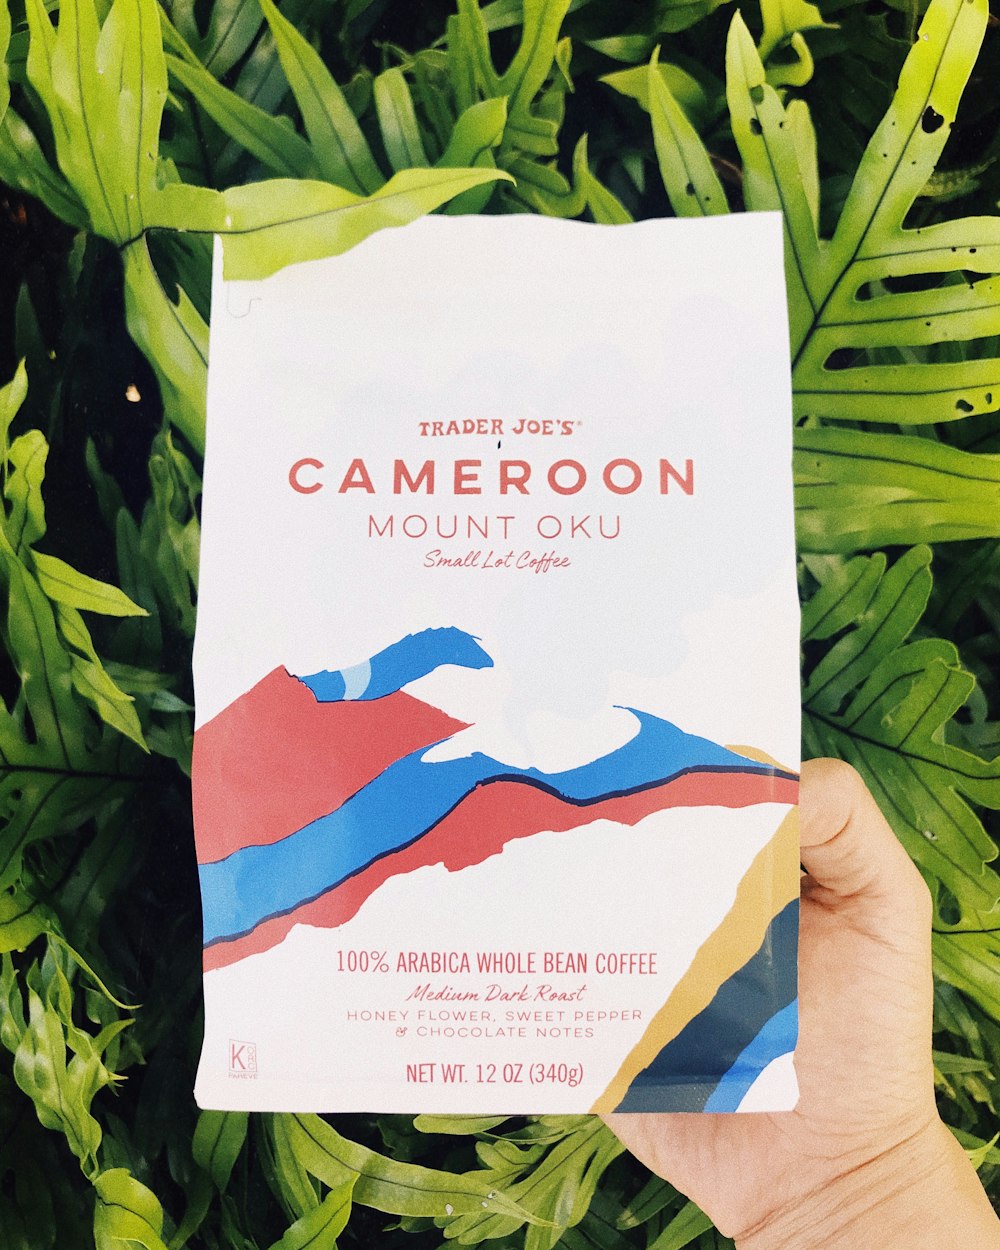 person holding Trader Joe's cameroon mount oku paper